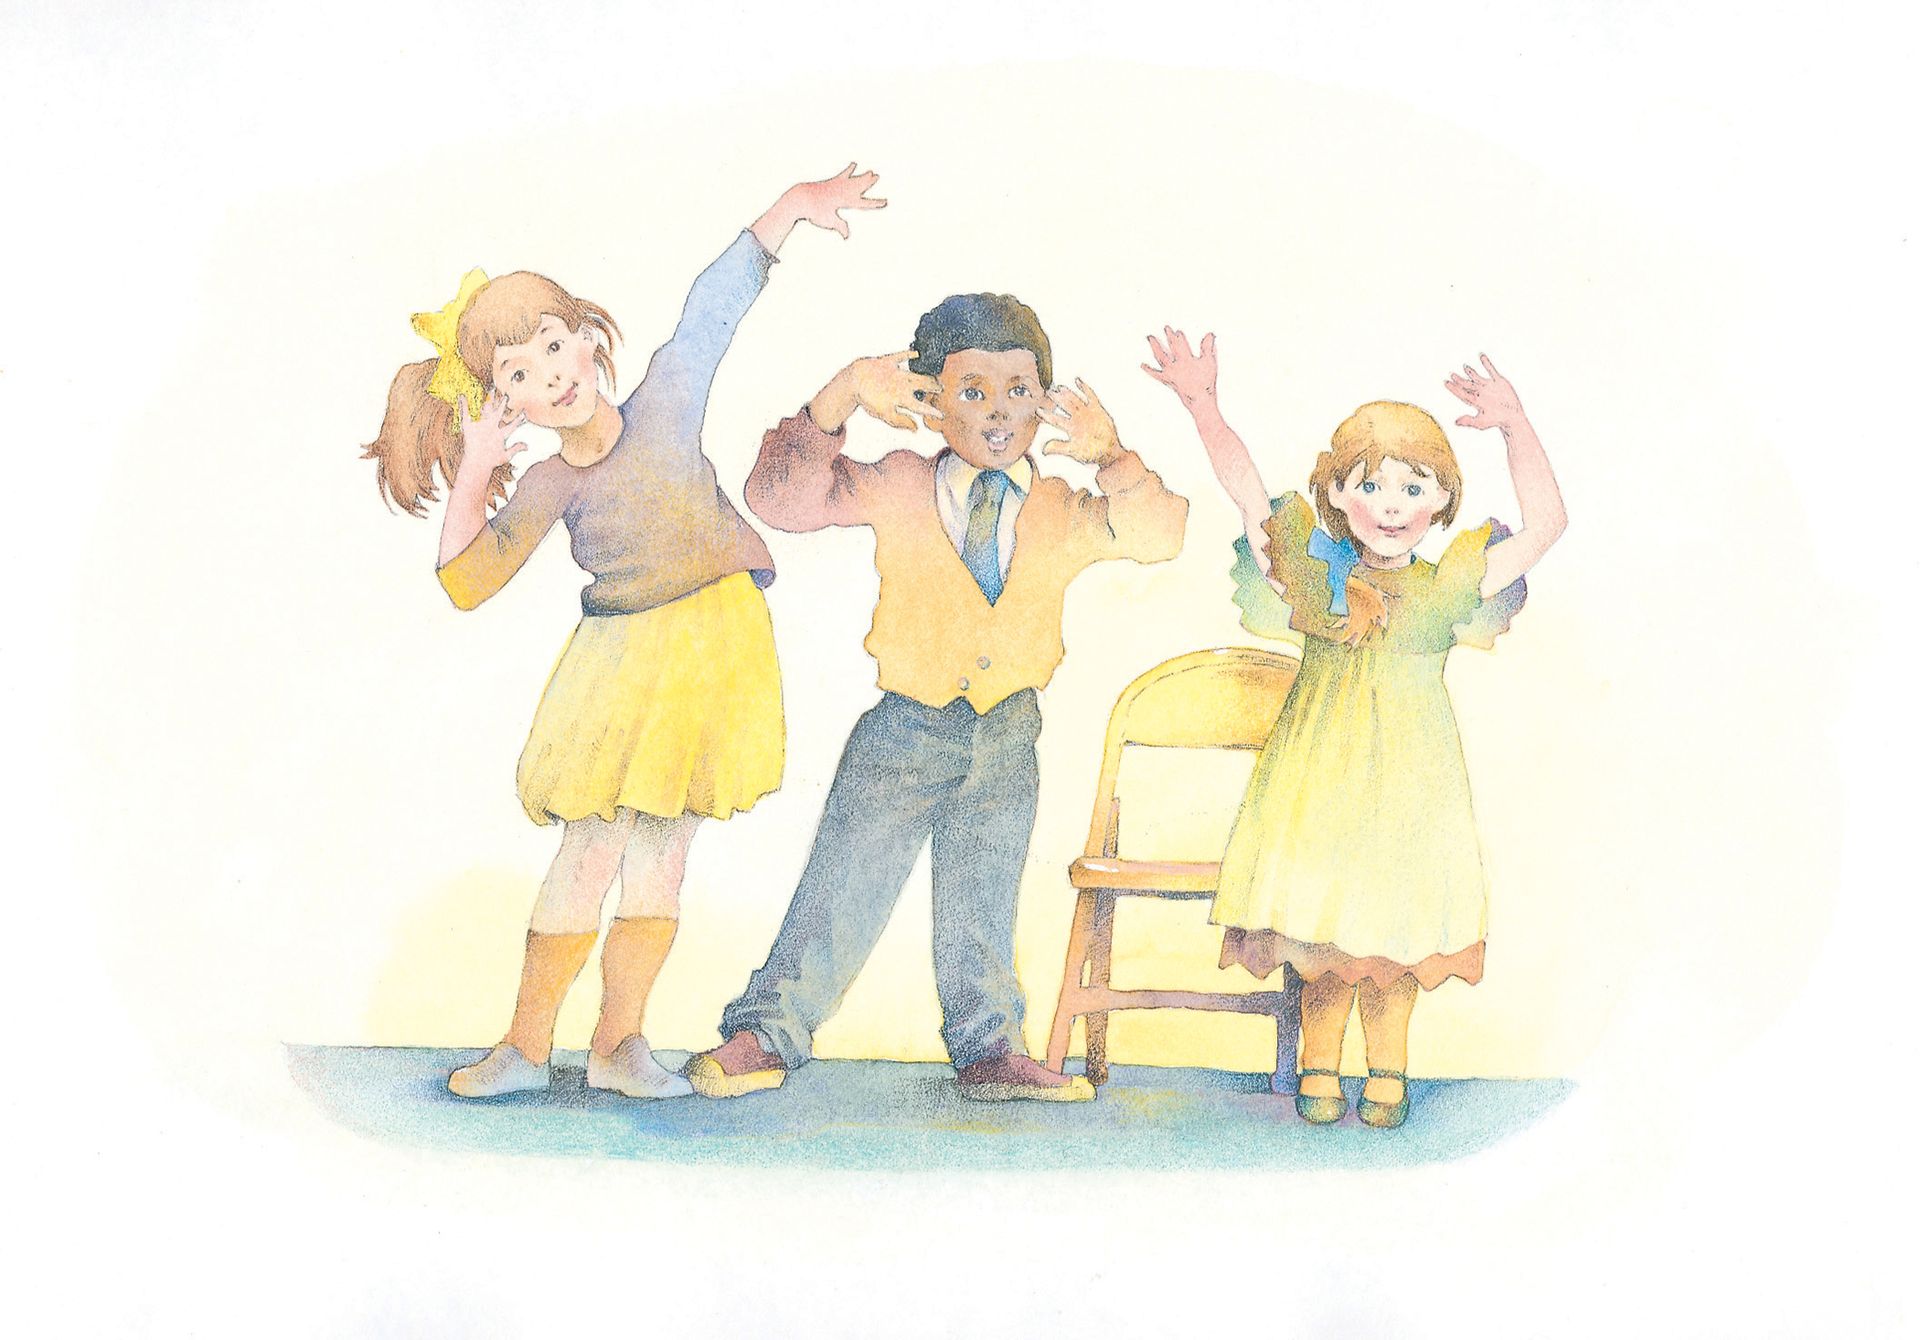 Three children dance during singing time. From the Children’s Songbook, page 279, “Oh, How We Love to Stand”; watercolor illustration by Richard Hull.